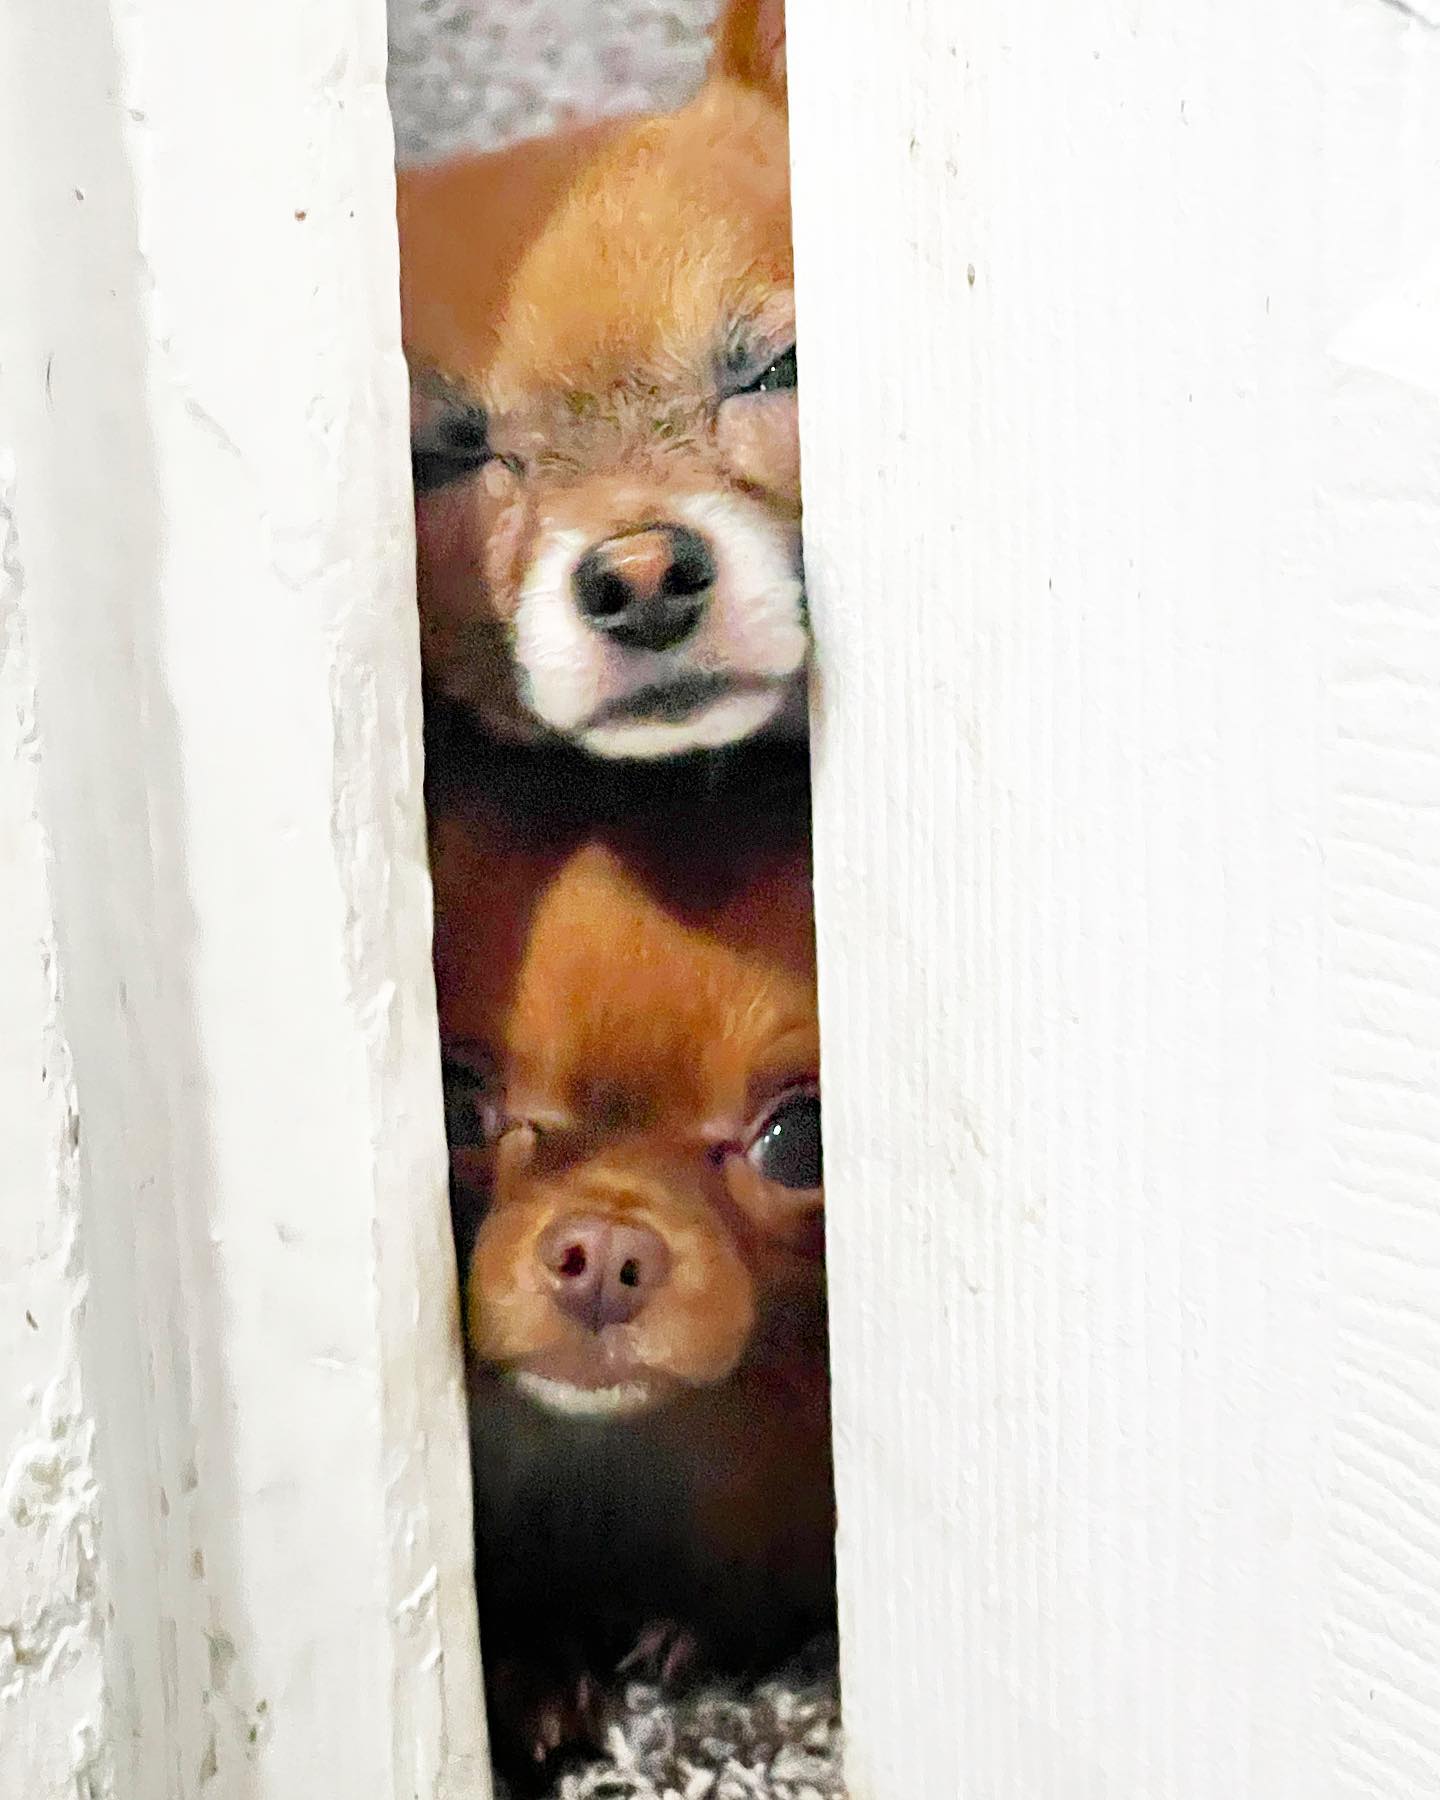 They we’re trying to get through the door. Astro’s facial expression is timeless. These animals are old souls. 🐶😭😍